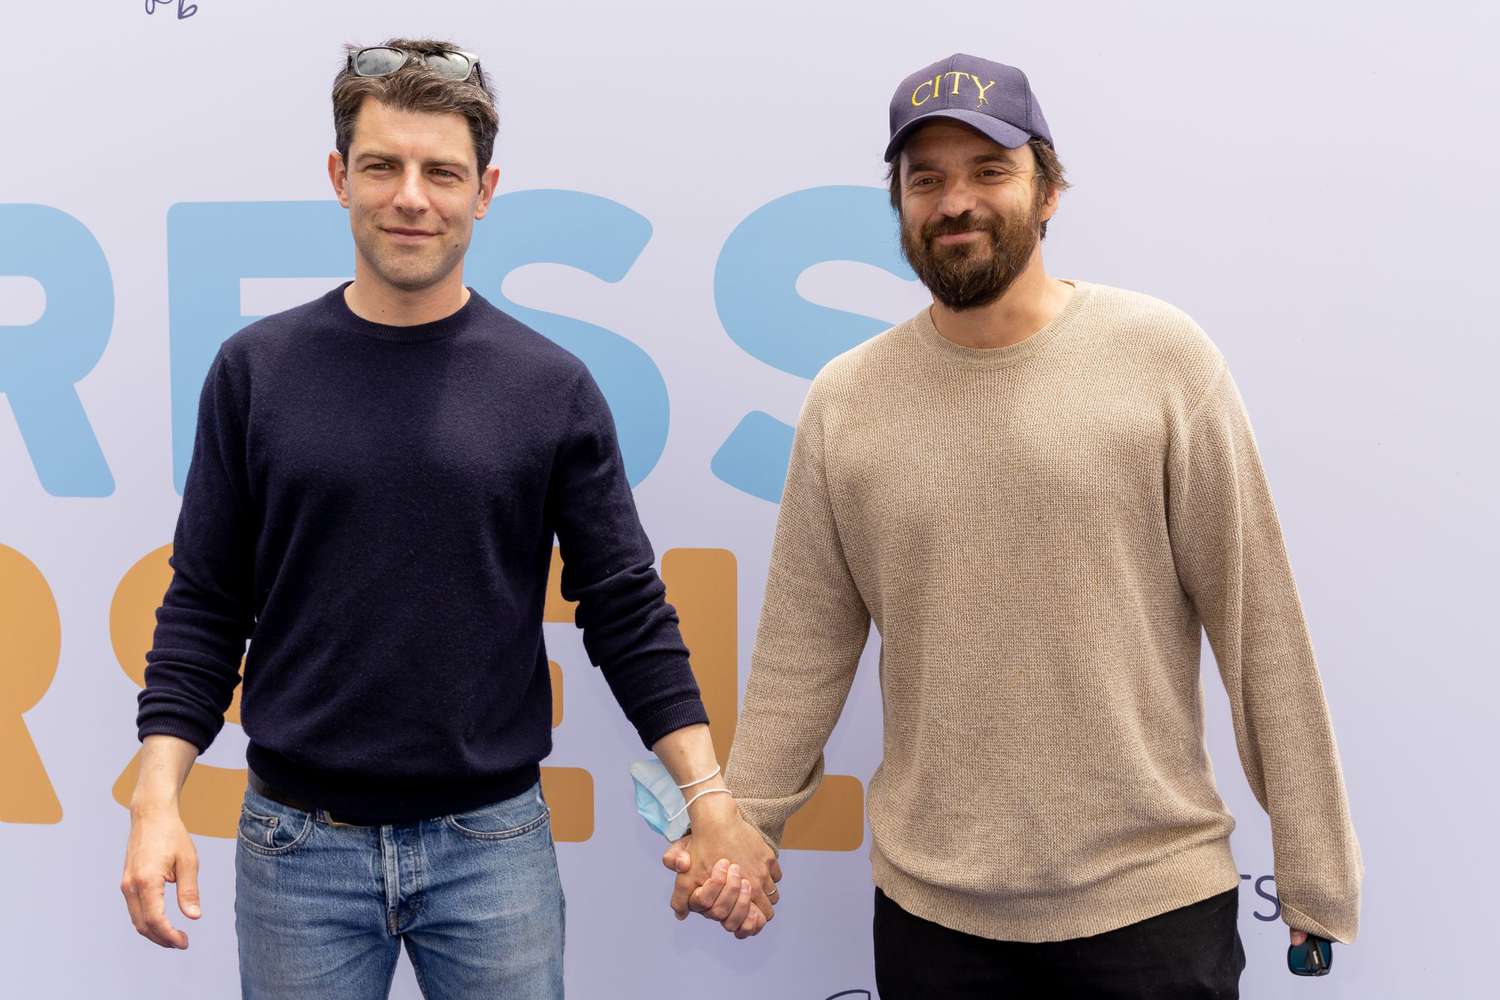 LOS ANGELES, CALIFORNIA - MAY 21: Max Greenfield and Jake Johnson attend the P.S. ARTS 'Express Yourself 2022' event at Fox Studio Lot on May 21, 2022 in Los Angeles, California. (Photo by Emma McIntyre/Getty Images)